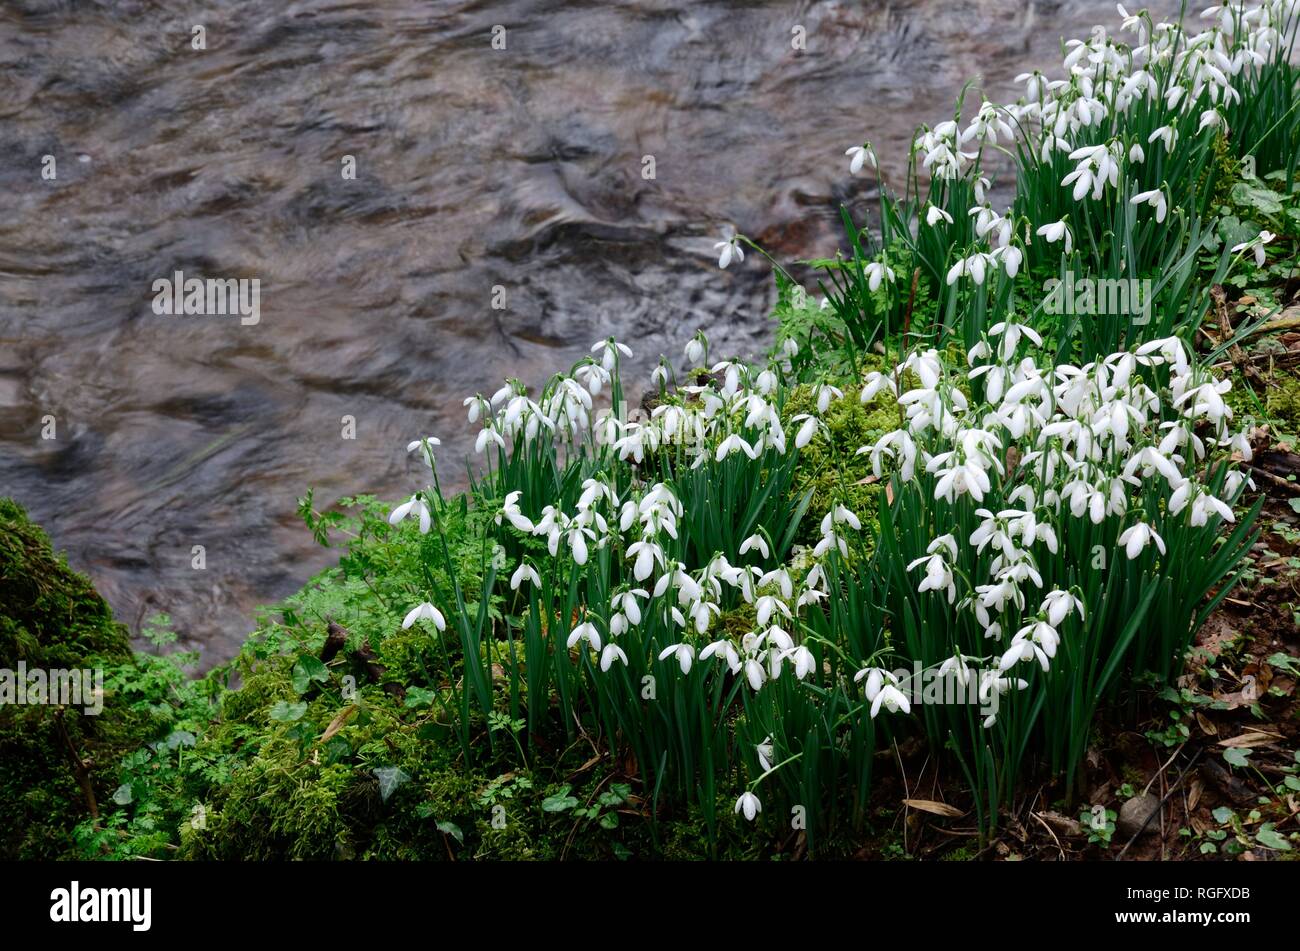 Snowdrops Galanthus nivalis growing on the bank of a stream river Carmarthenshire Wales UK Stock Photo